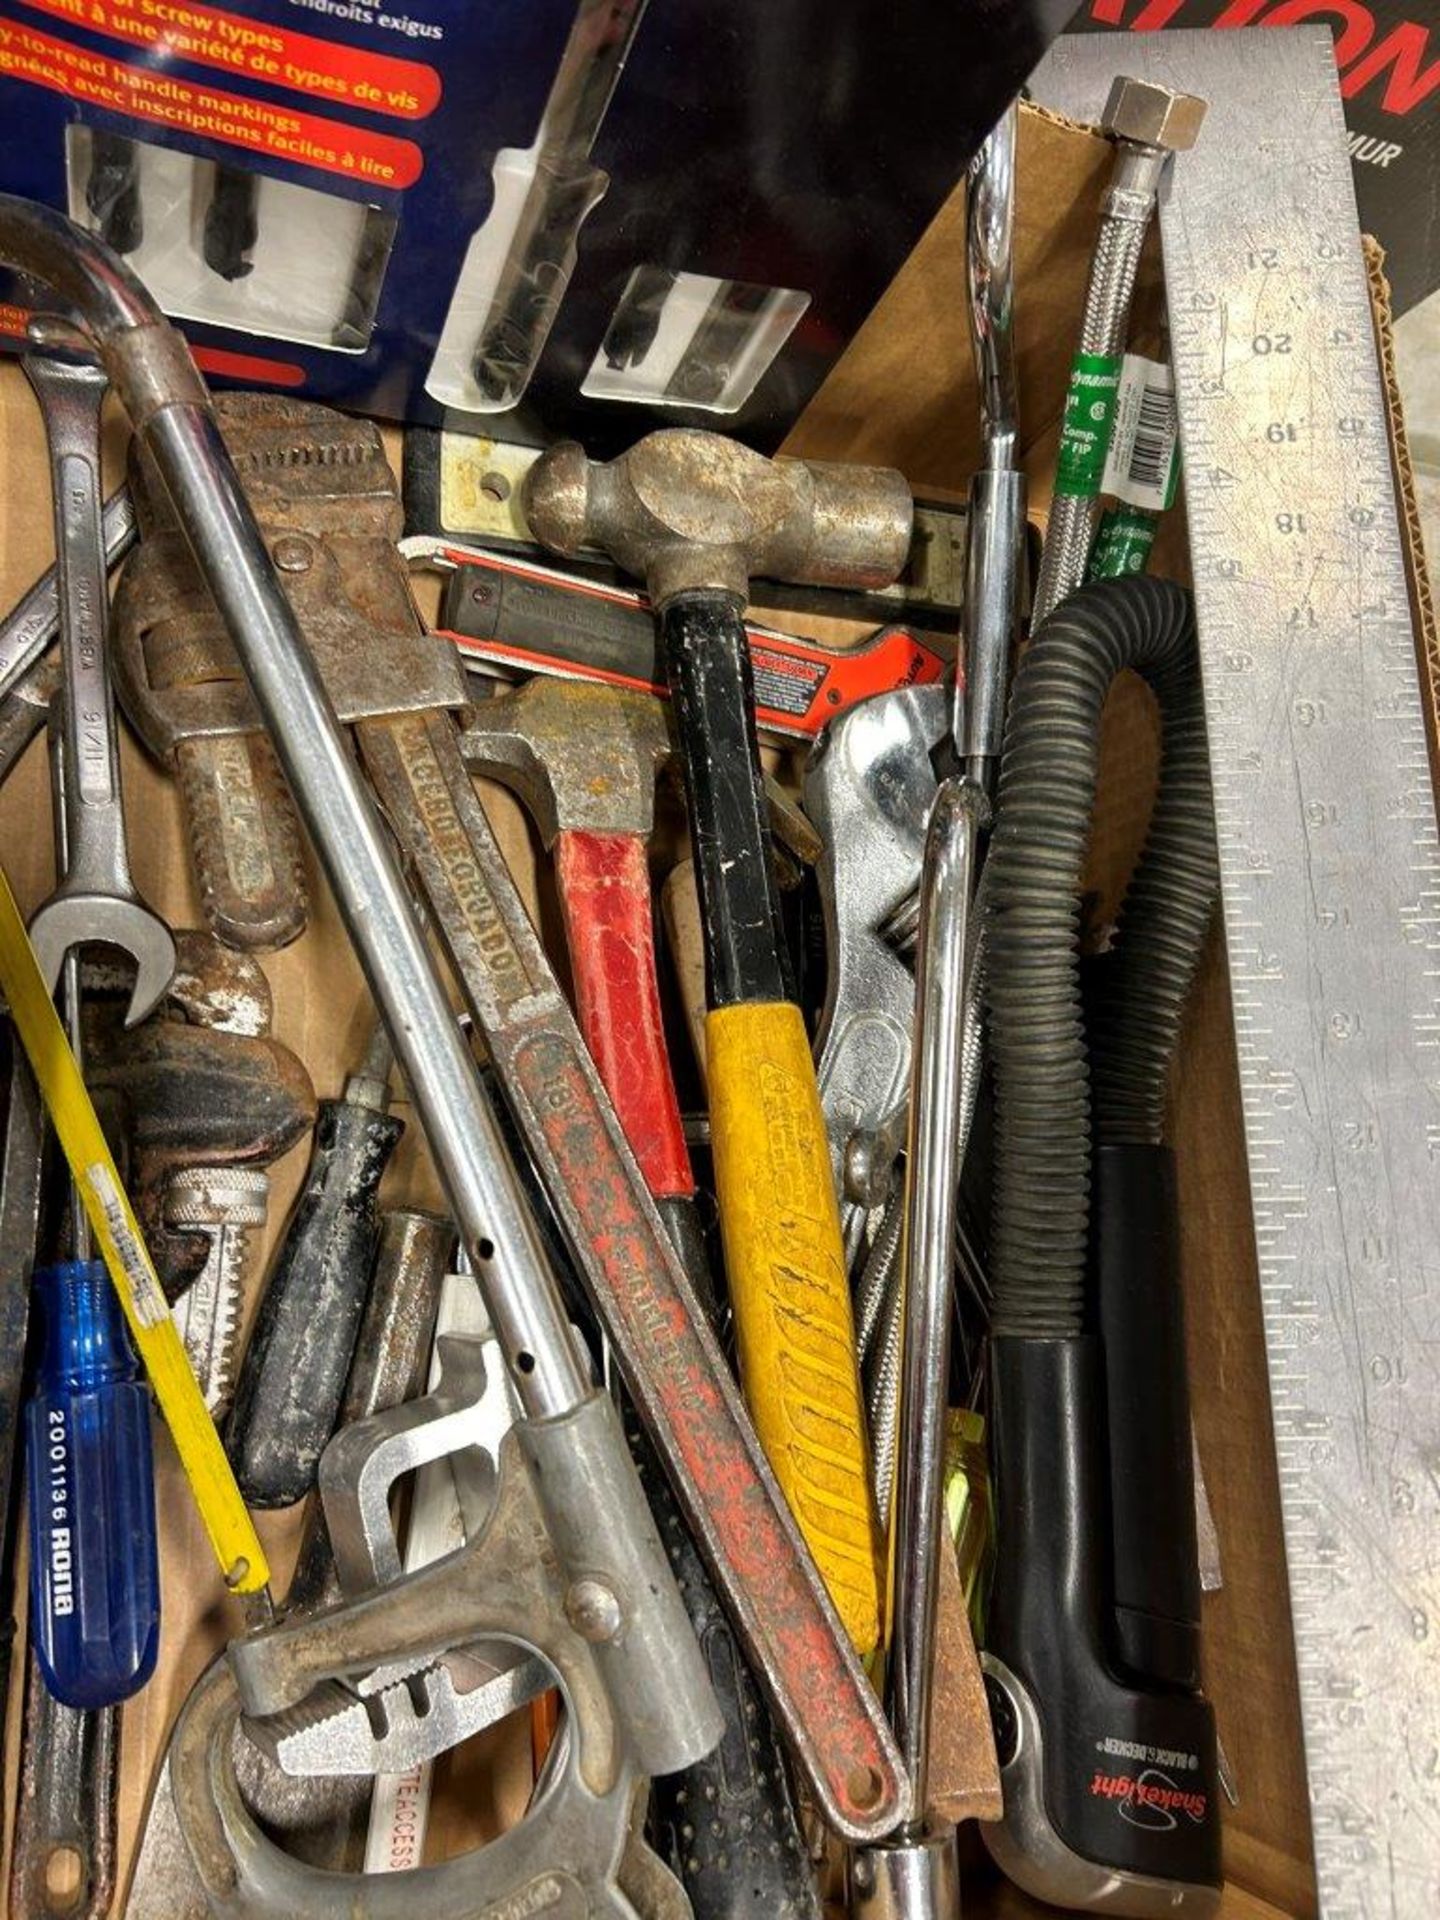 L/O ASSORTED HAND TOOLS, WRENCHES, LEVEL, SCREWDRIVERS, ETC. - Image 4 of 4